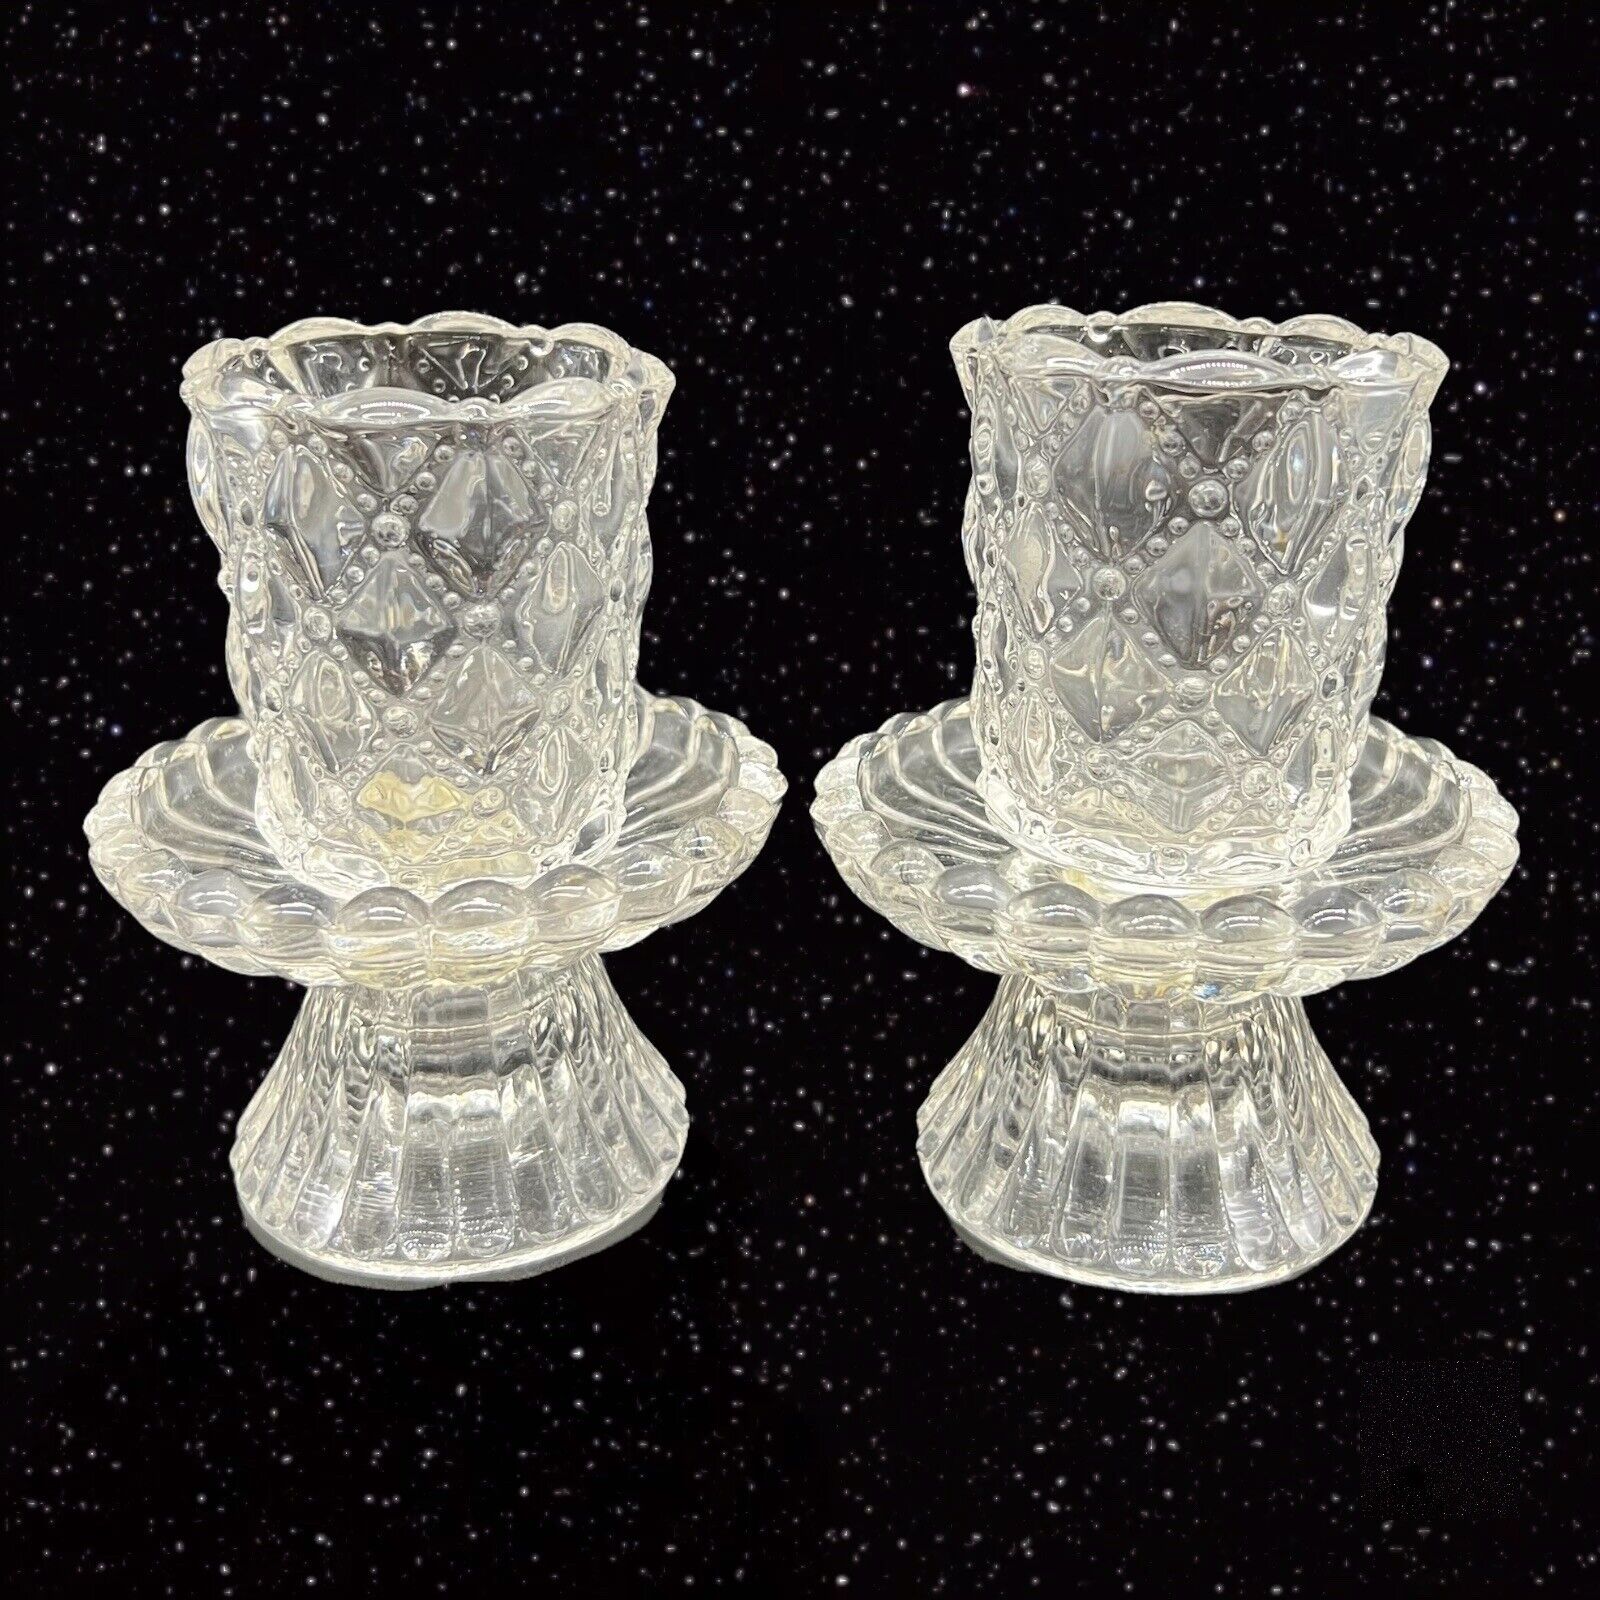 Partylite Quilted Crystal Pair Votive Candle Holders 2 Piece Set P9246 Vintage